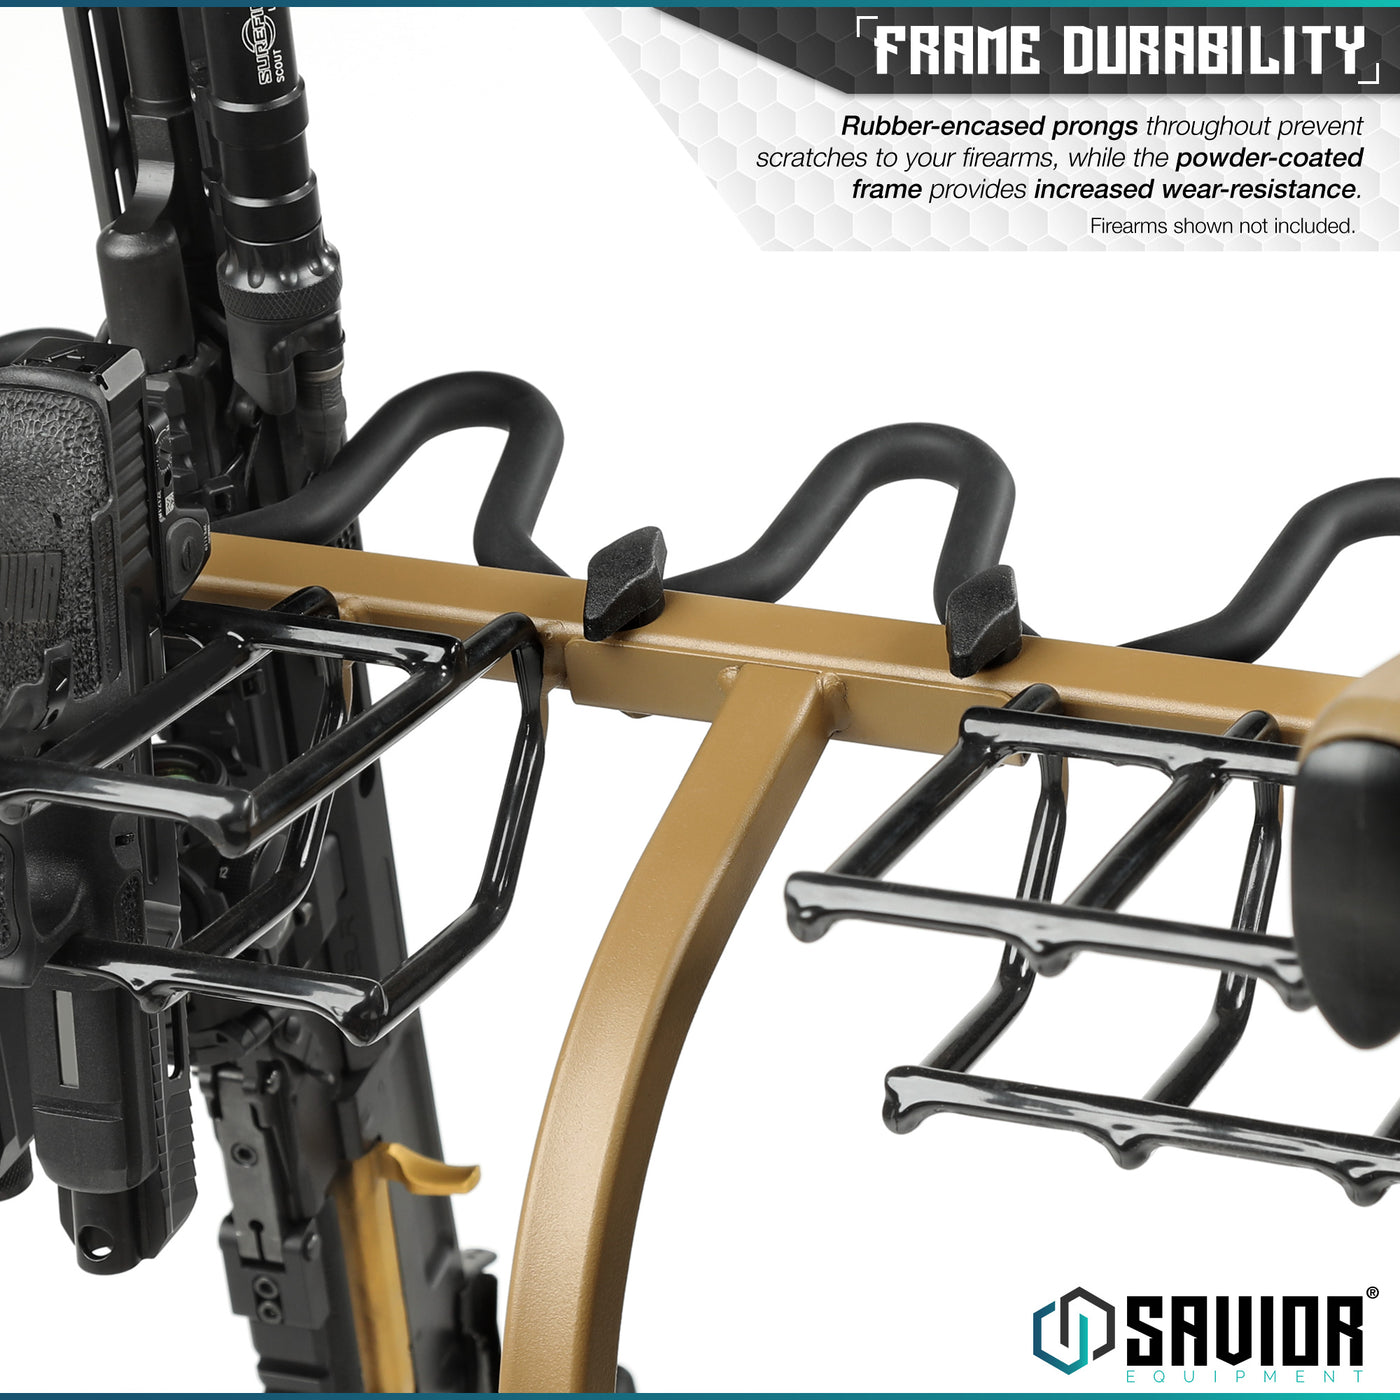 Frame Durability - Rubber-encased prongs throughout prevent scratches to your firearms, while the powder-coated frame provides increased wear-resistance. Firearms shown not included.